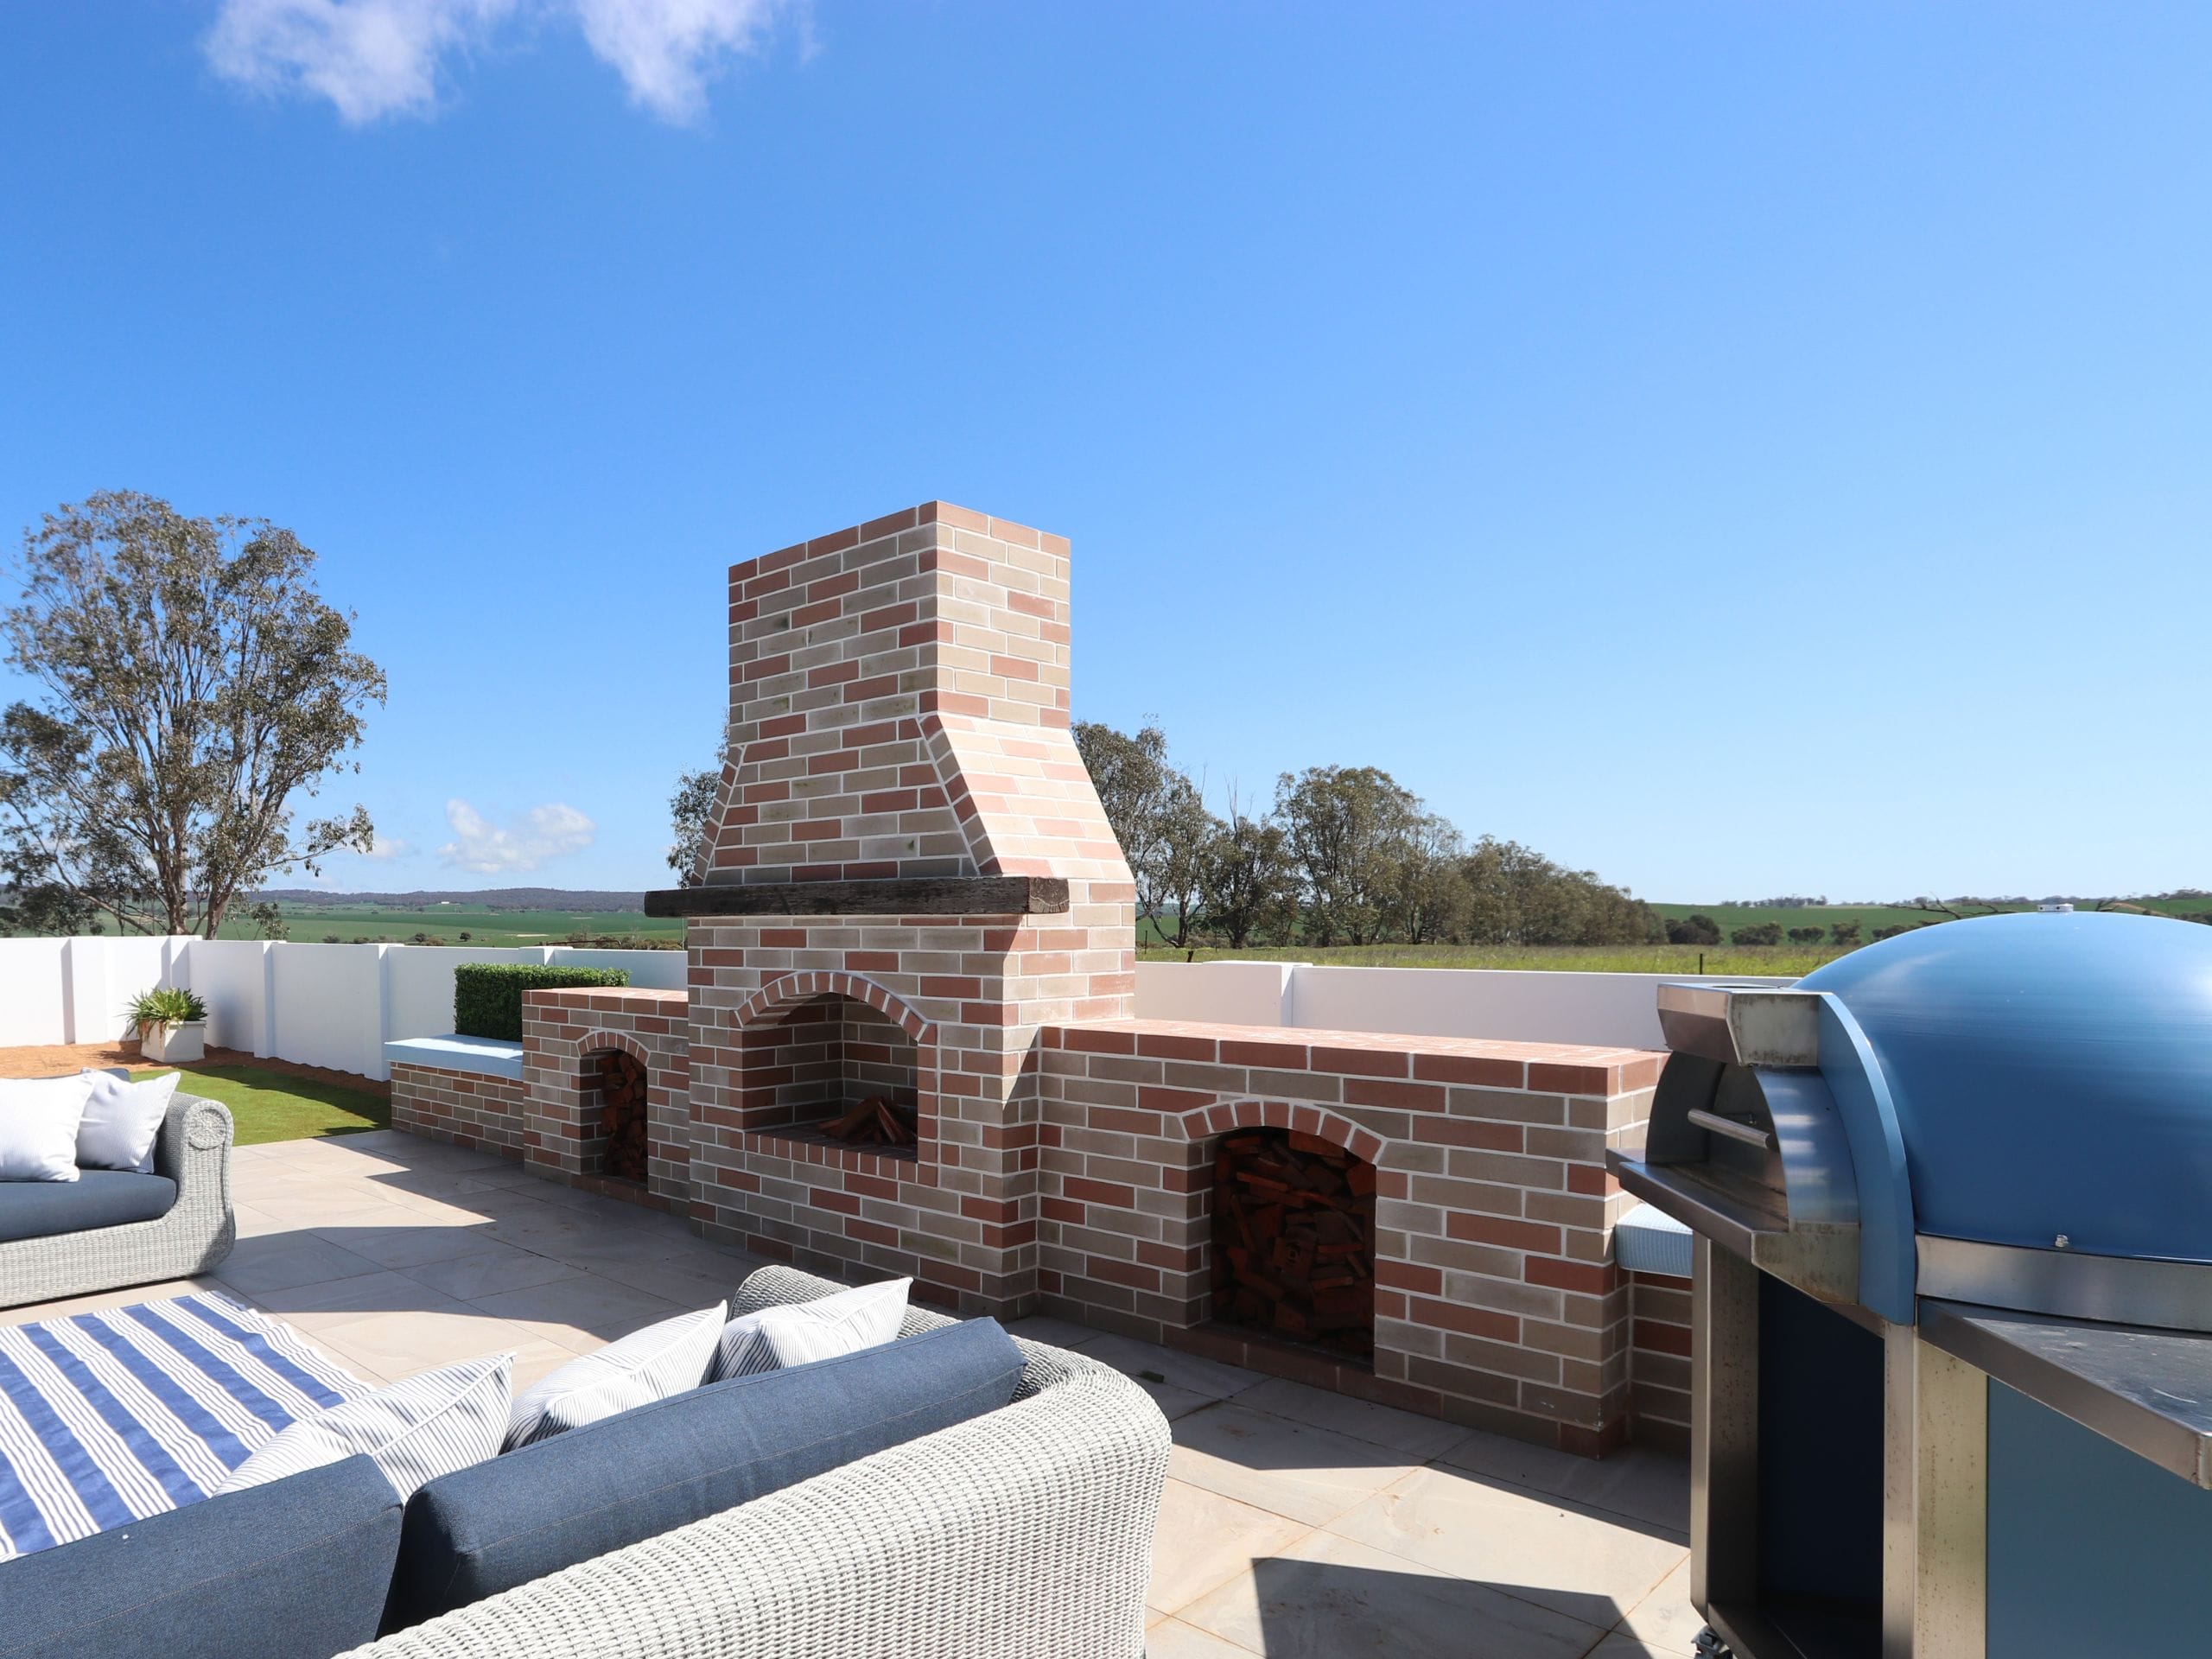 A wood-fire pizza oven is a high priority for many when undertaking a backyard remodel